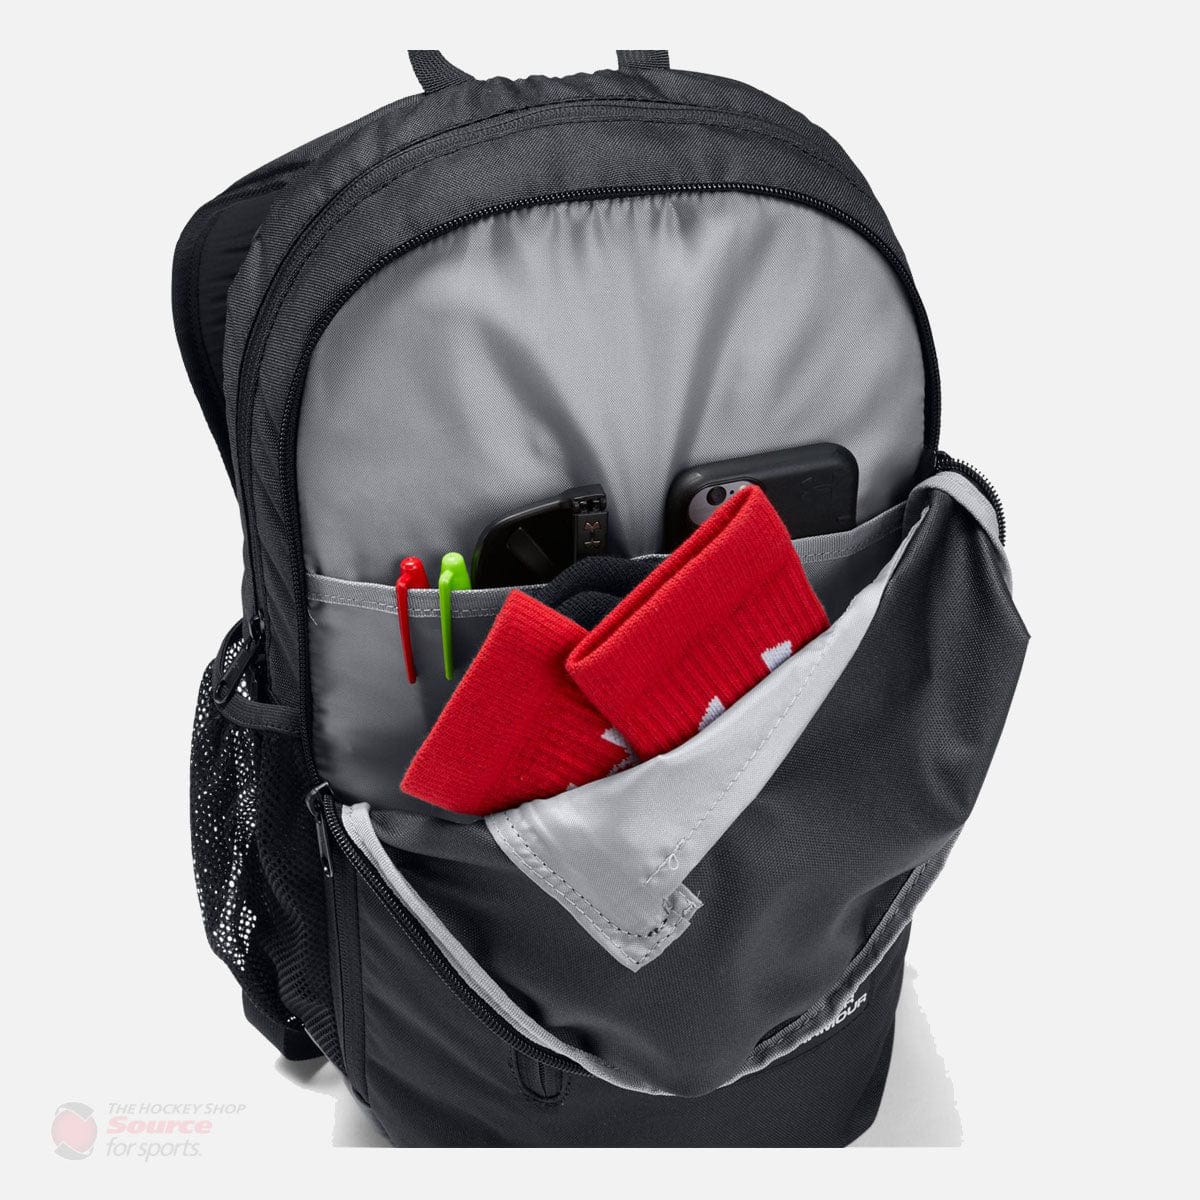 Under Armour Roland Backpack